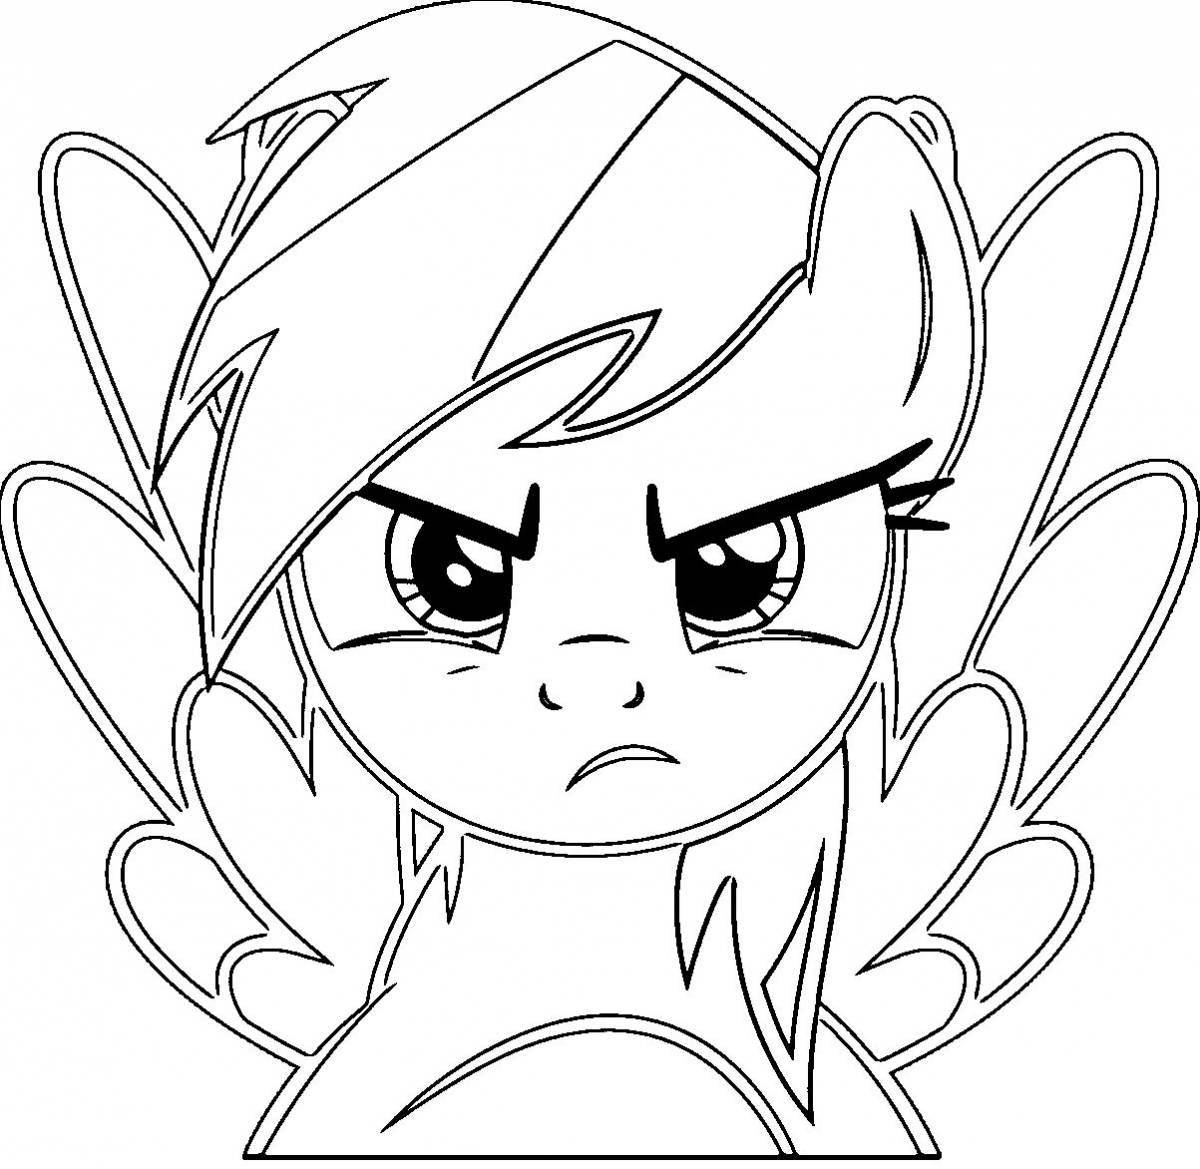 Charming rainbow dash coloring page